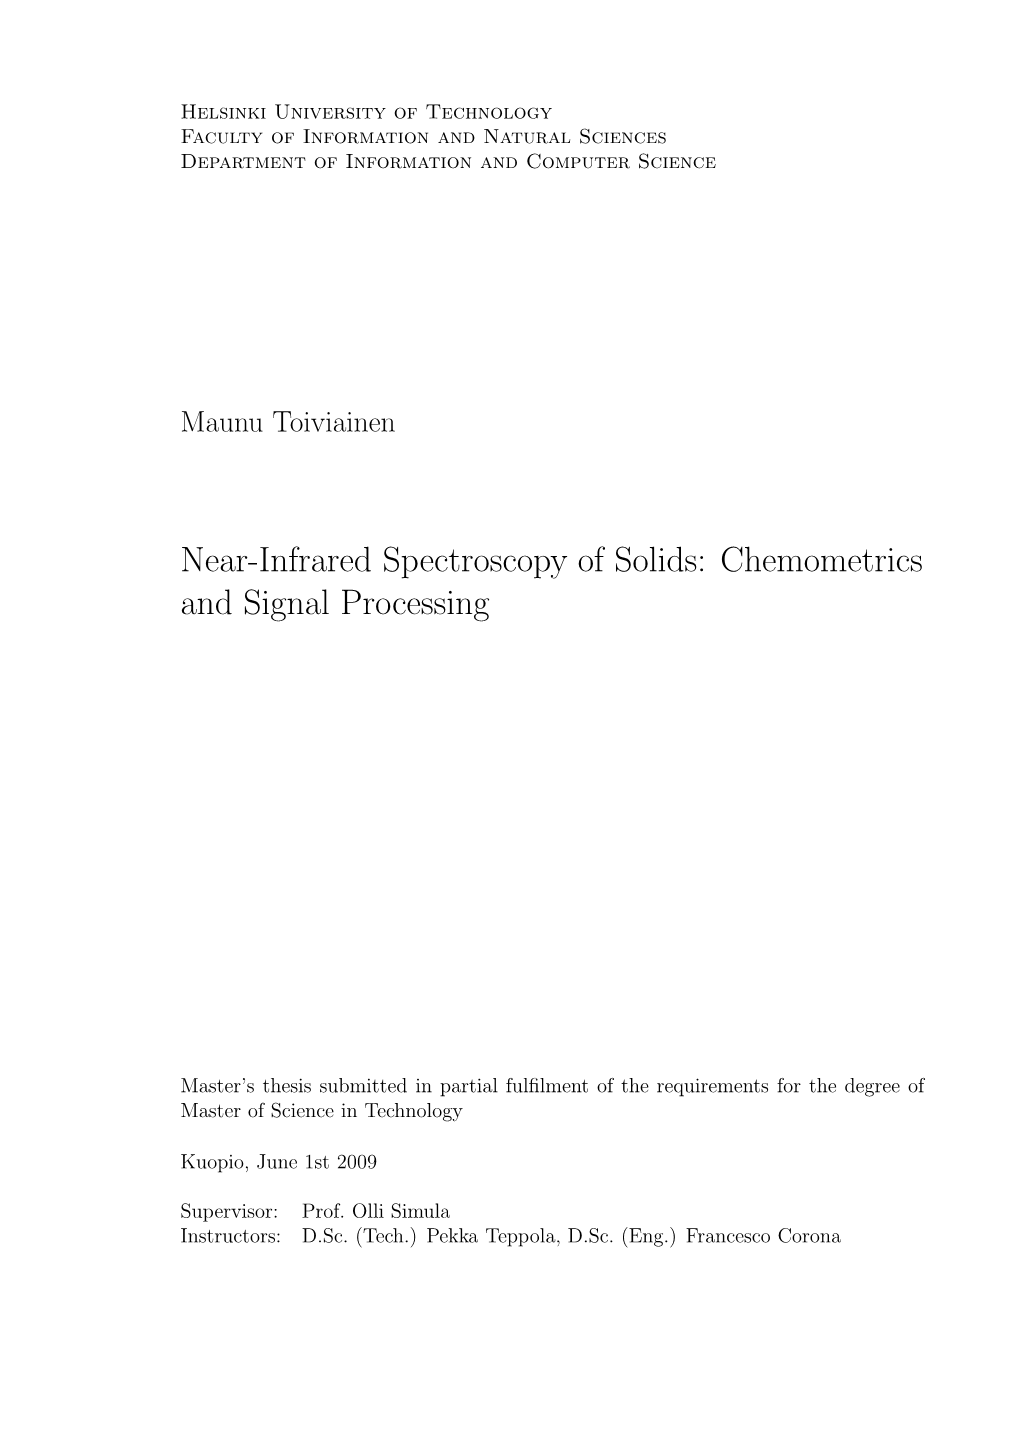 Near-Infrared Spectroscopy of Solids: Chemometrics and Signal Processing